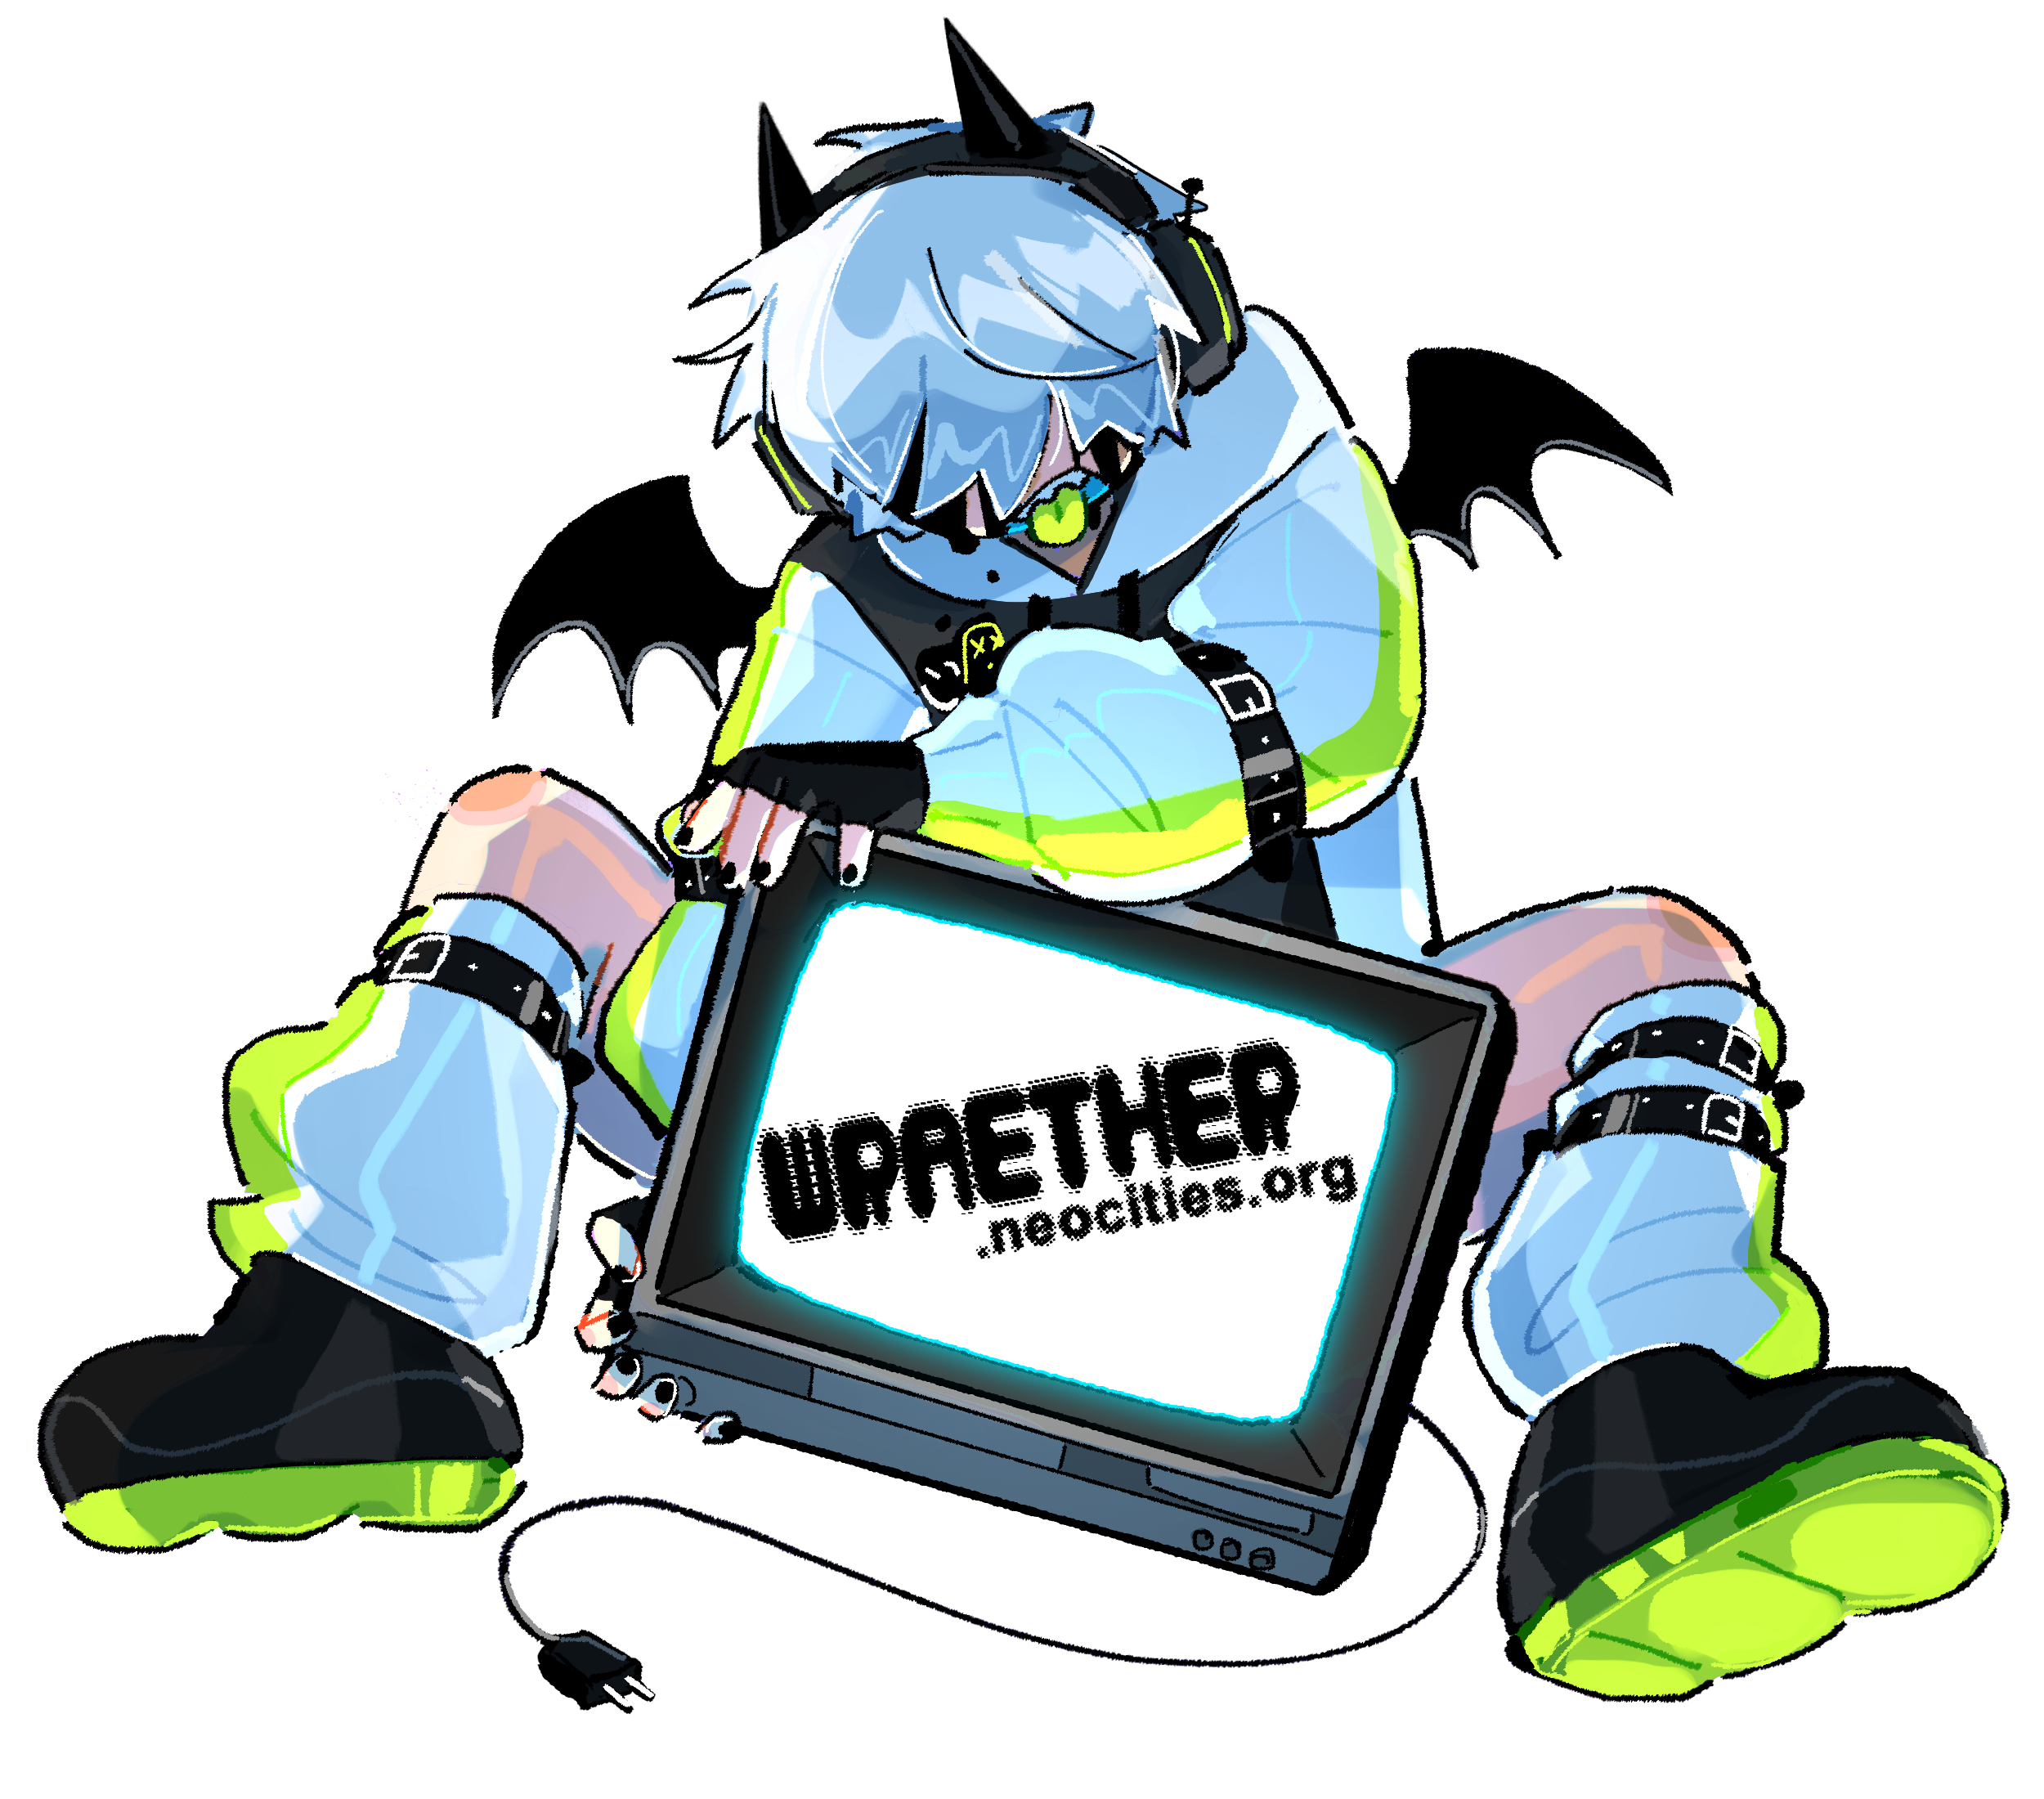 Drawing of Wraeth holding an old television monitor between his legs. Text on the screen reads 'Wraether.neocities.org' he is wearing a white hoodie and matching legwarmers held down with black leather straps. He wears black boots with green soles. He has black devil horns on his headphones, bat wings, and a tail resembling an electric plug.